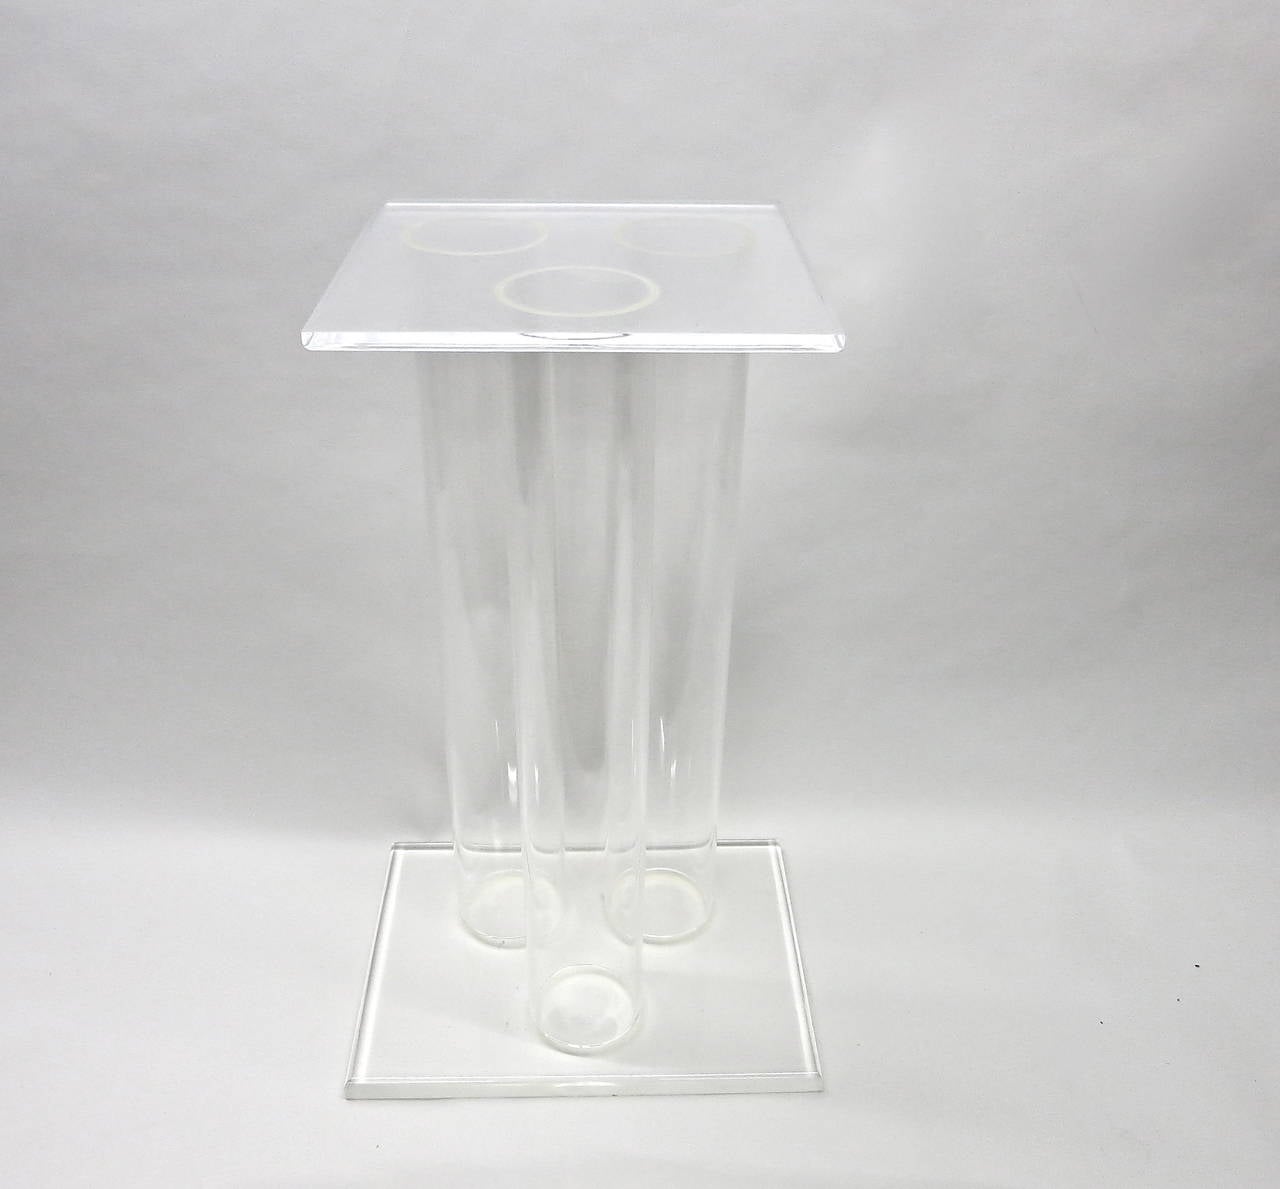 Pedestal in clear Lucite with three 5 inch diameter cylinders attached to a rectangular base positioned in a triangle and Stand vertically to support a square top.